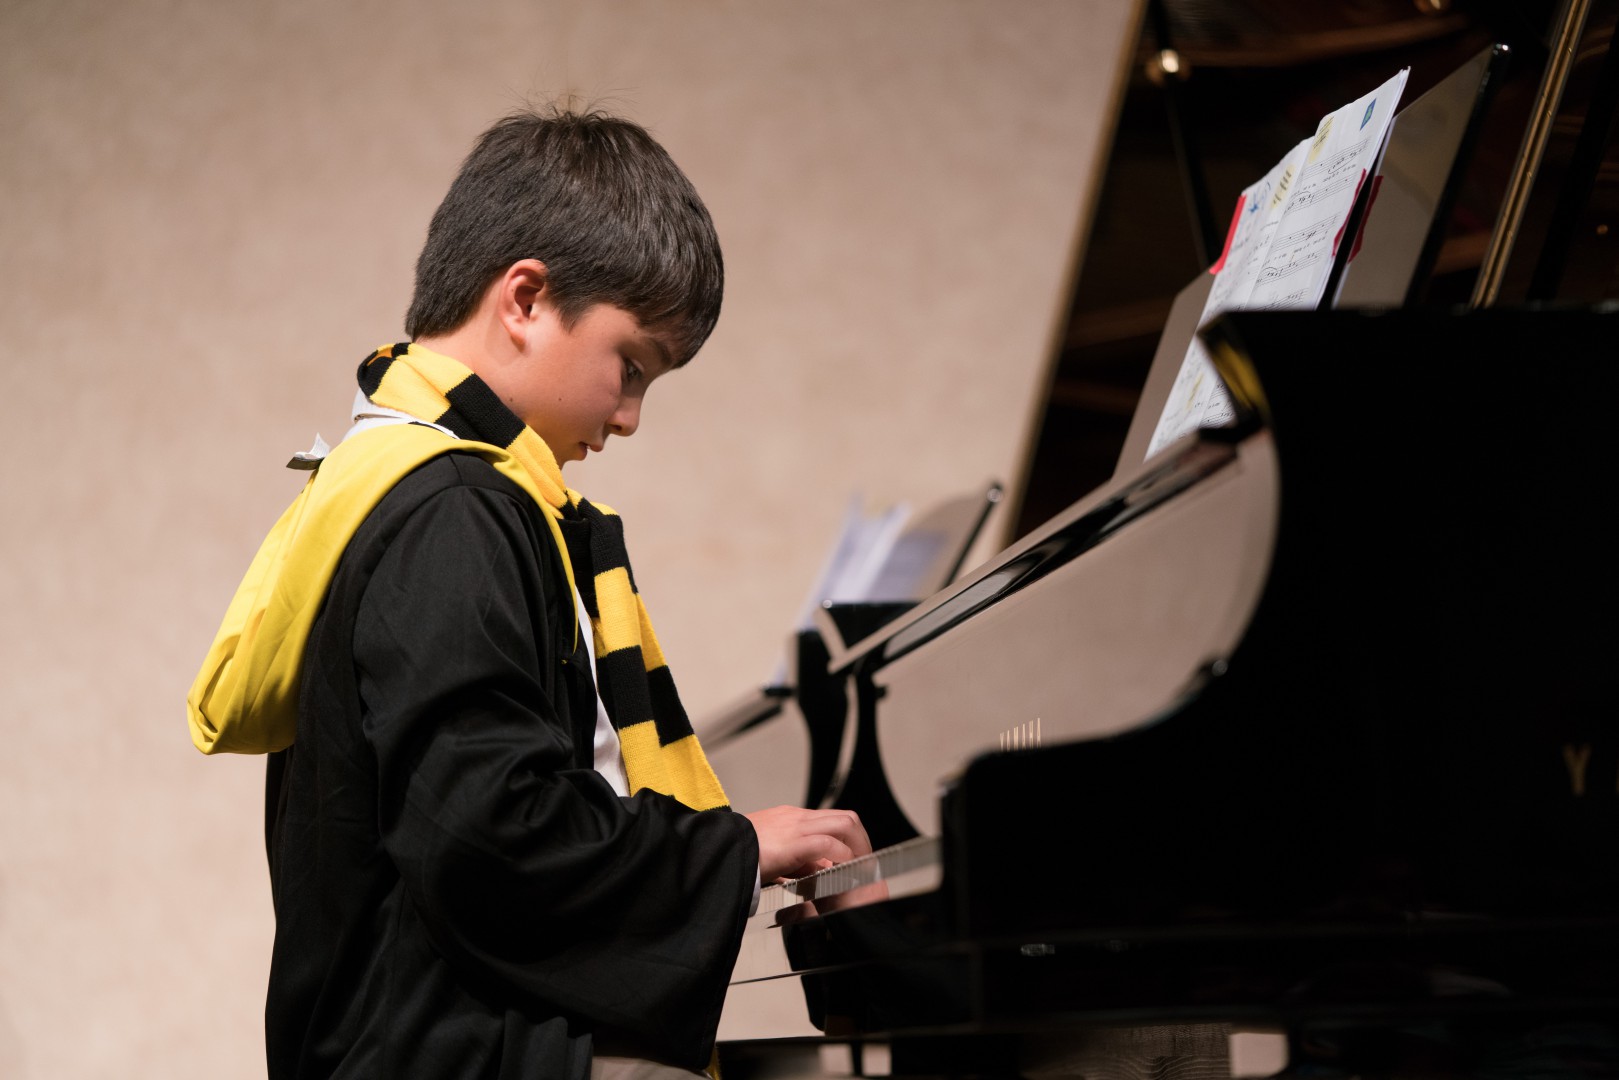 Little boy wearing yellow and black scarf playing the piano